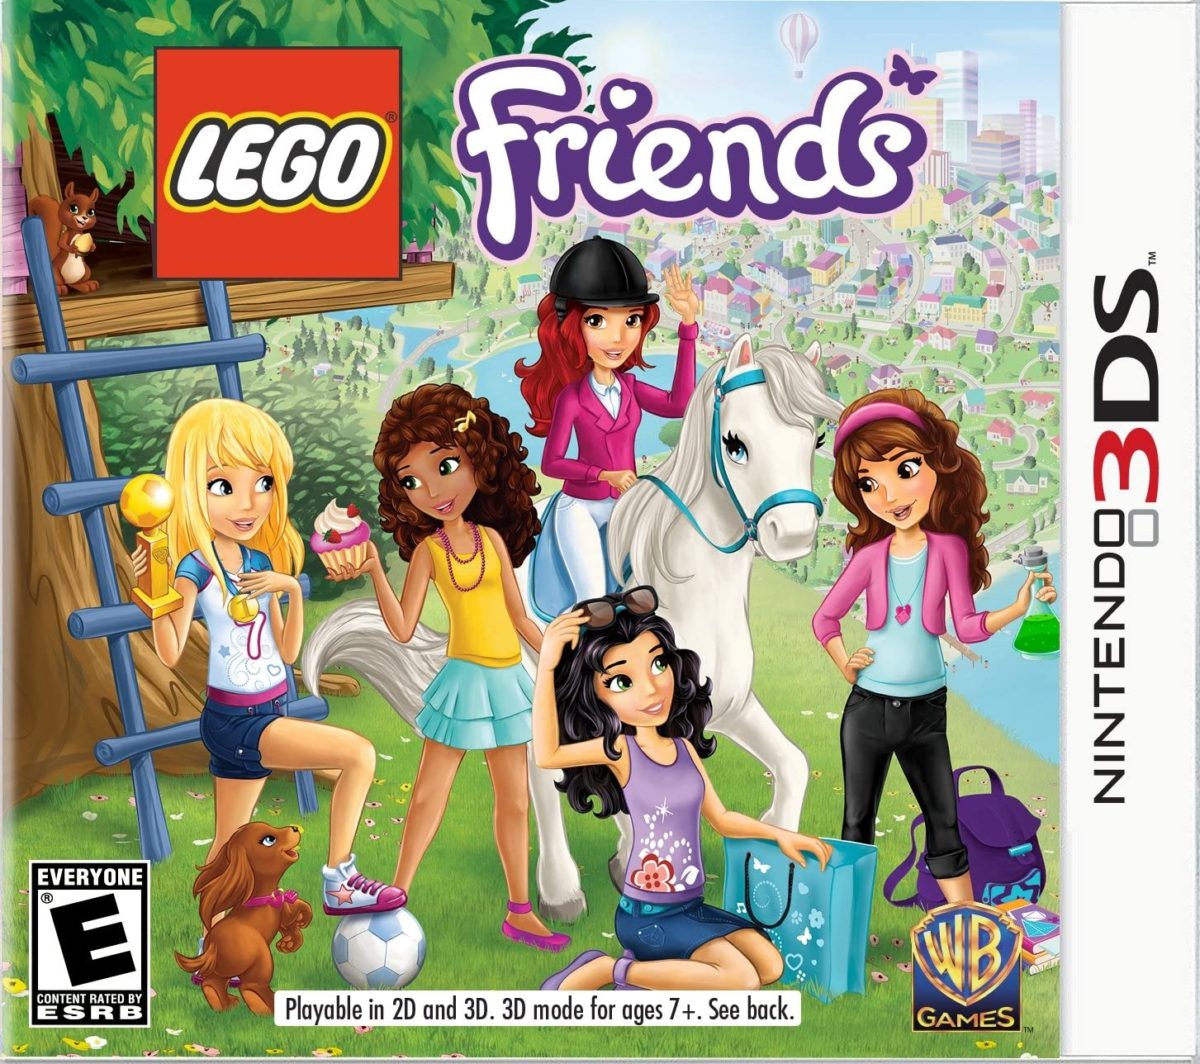 Lego Friends player count stats